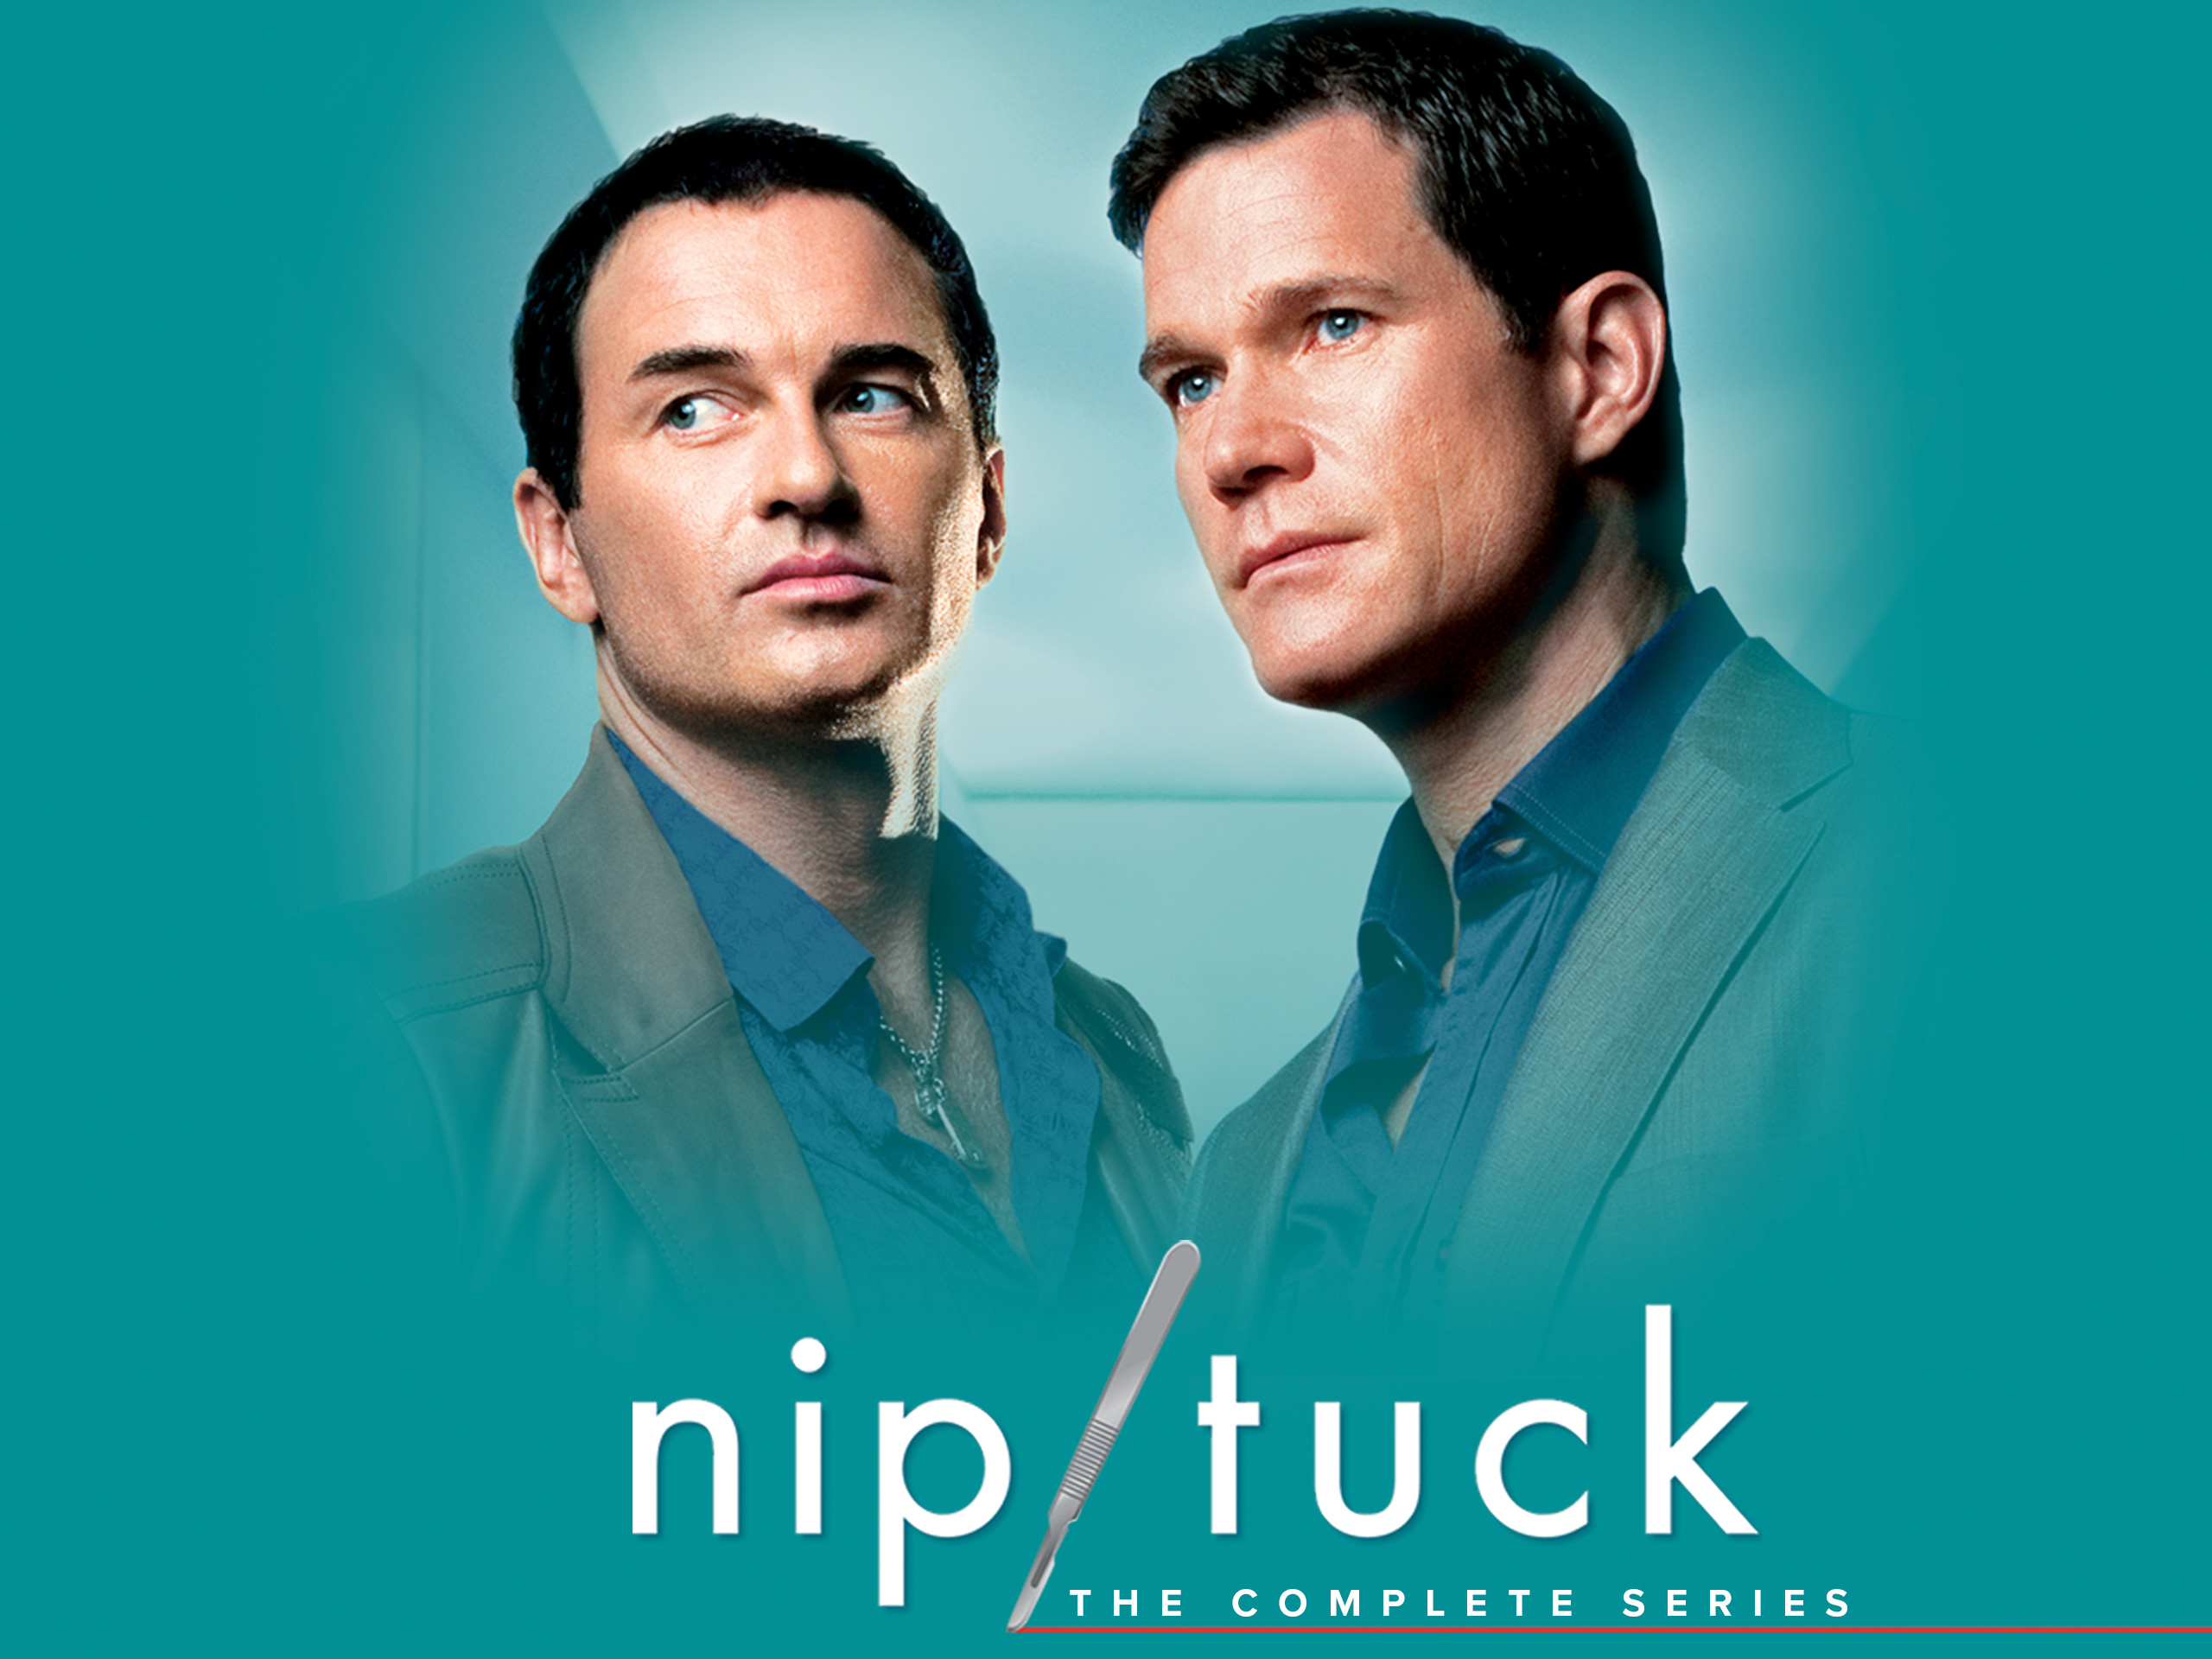 andras hegedus recommends Nip Tuck Streaming Free